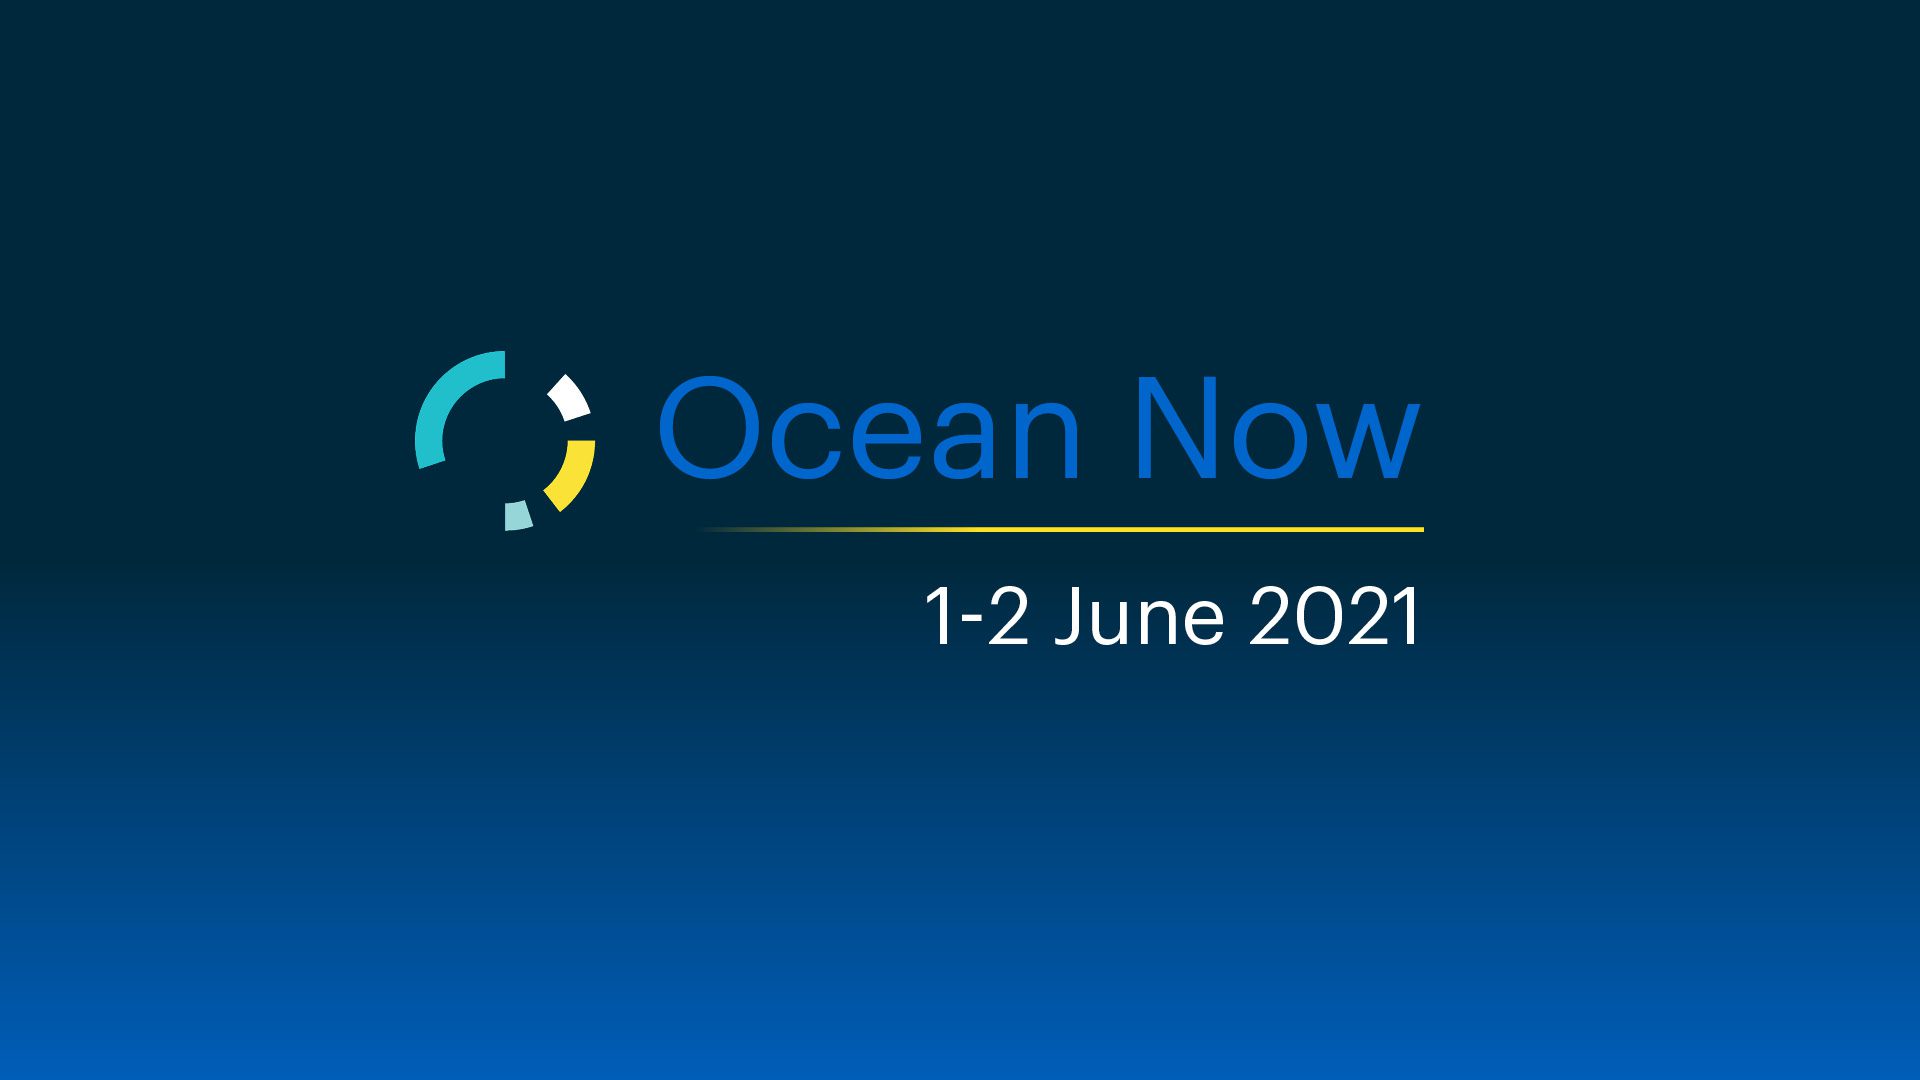 Nor-Shipping launches Ocean Now in June